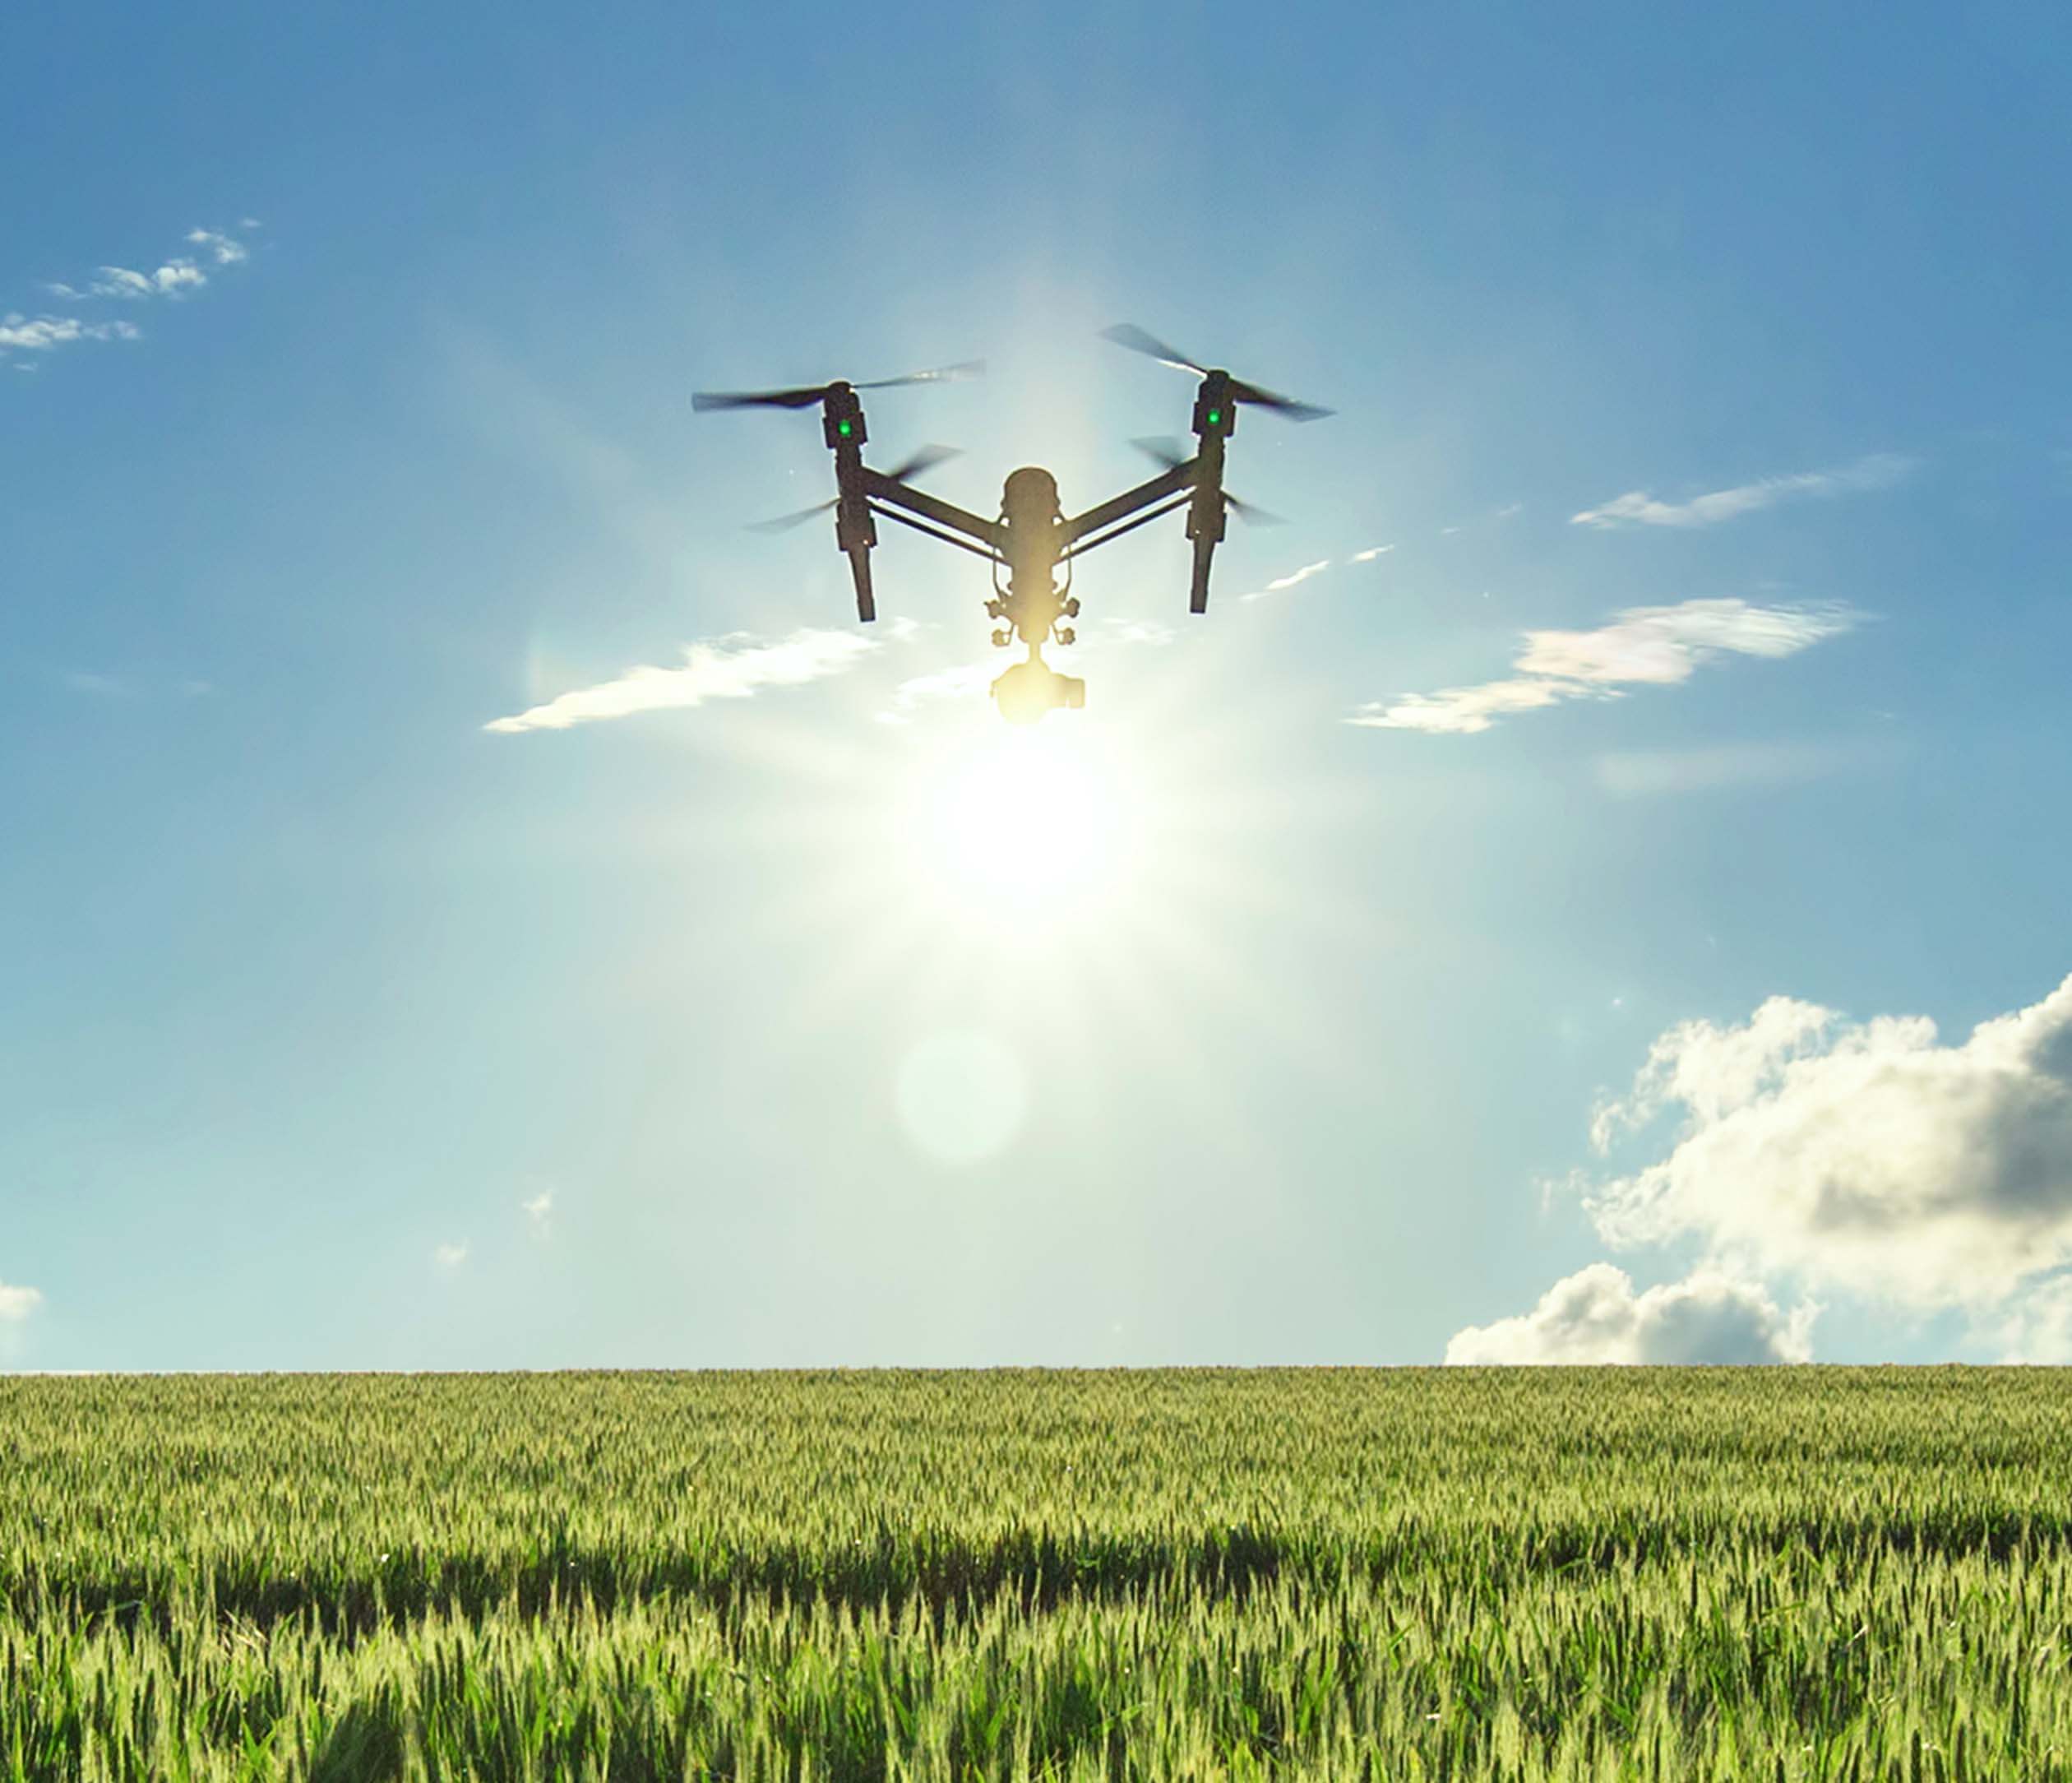 Agricultrual drone above a field with sunny sky